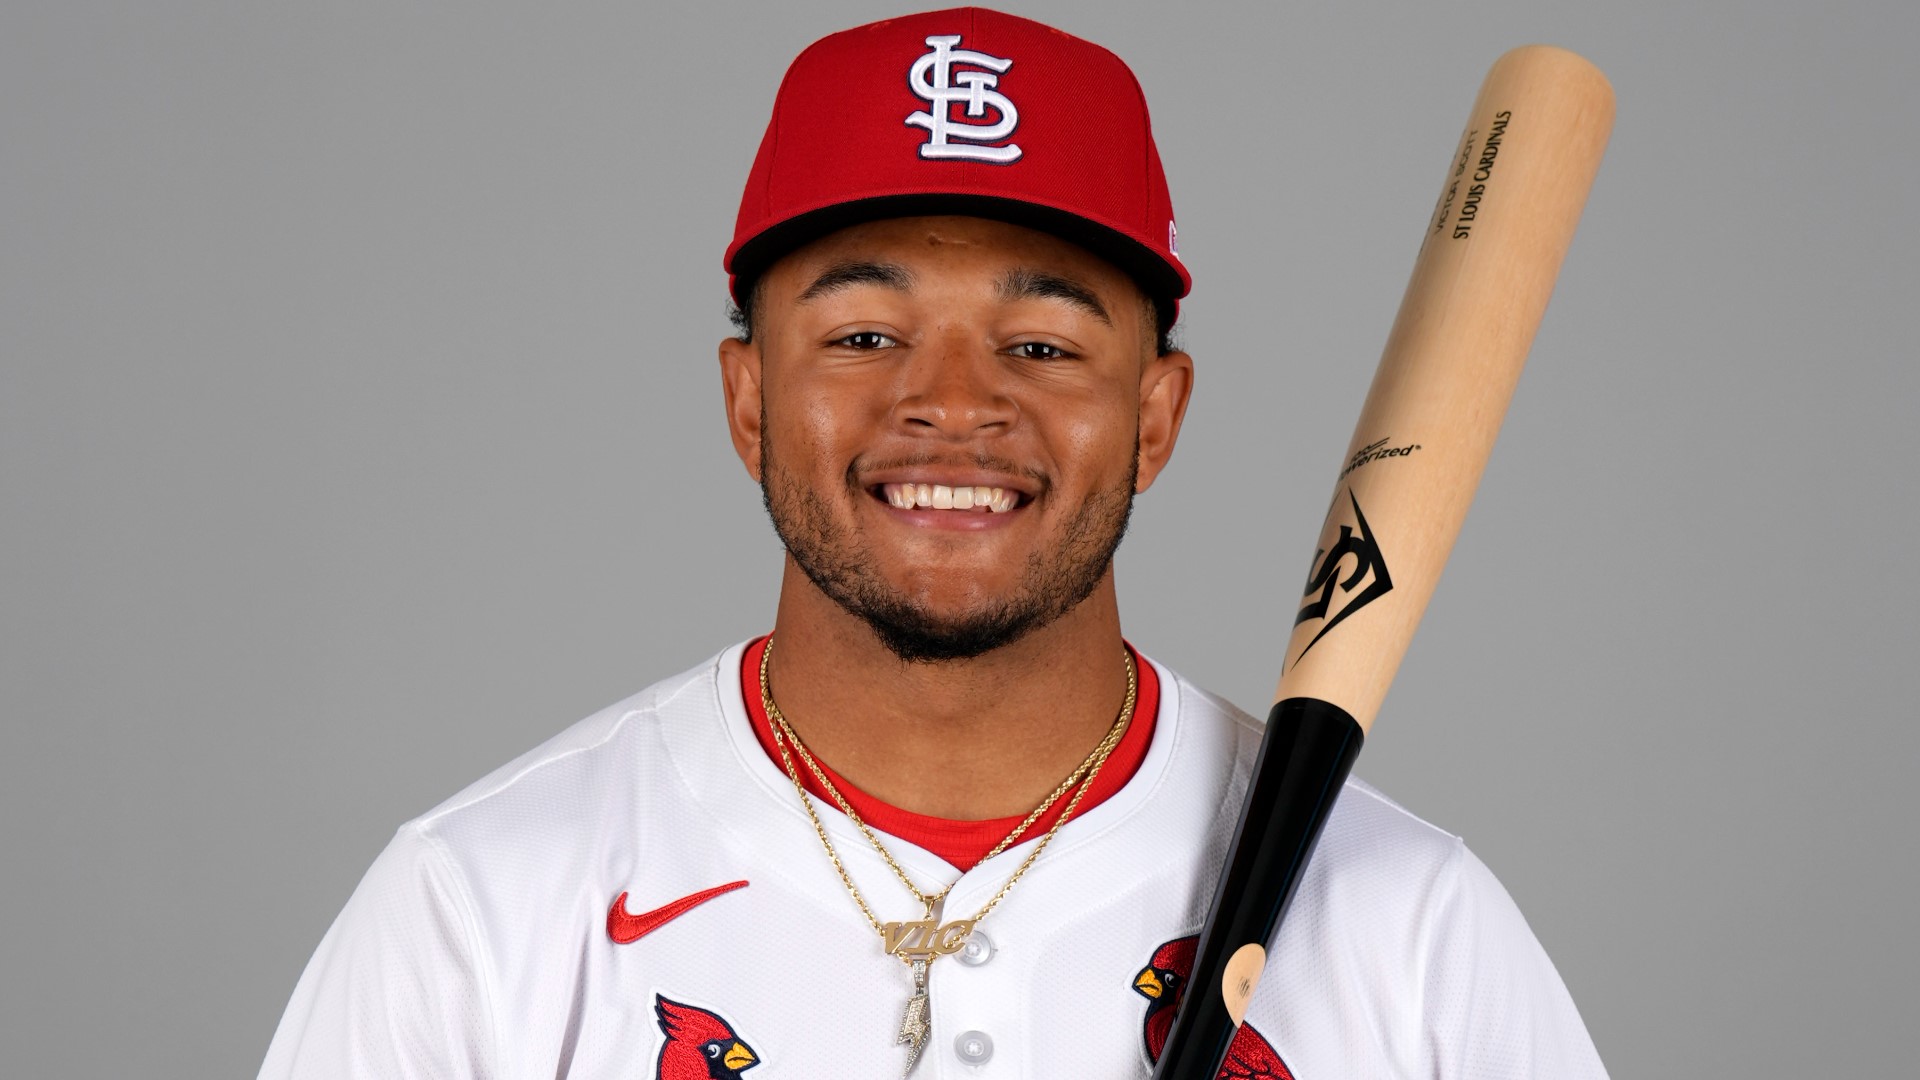 St. Louis will be without three of its outfielders following Dylan Carlson's injury. One of the Cardinals' top prospects will start the season with the team.